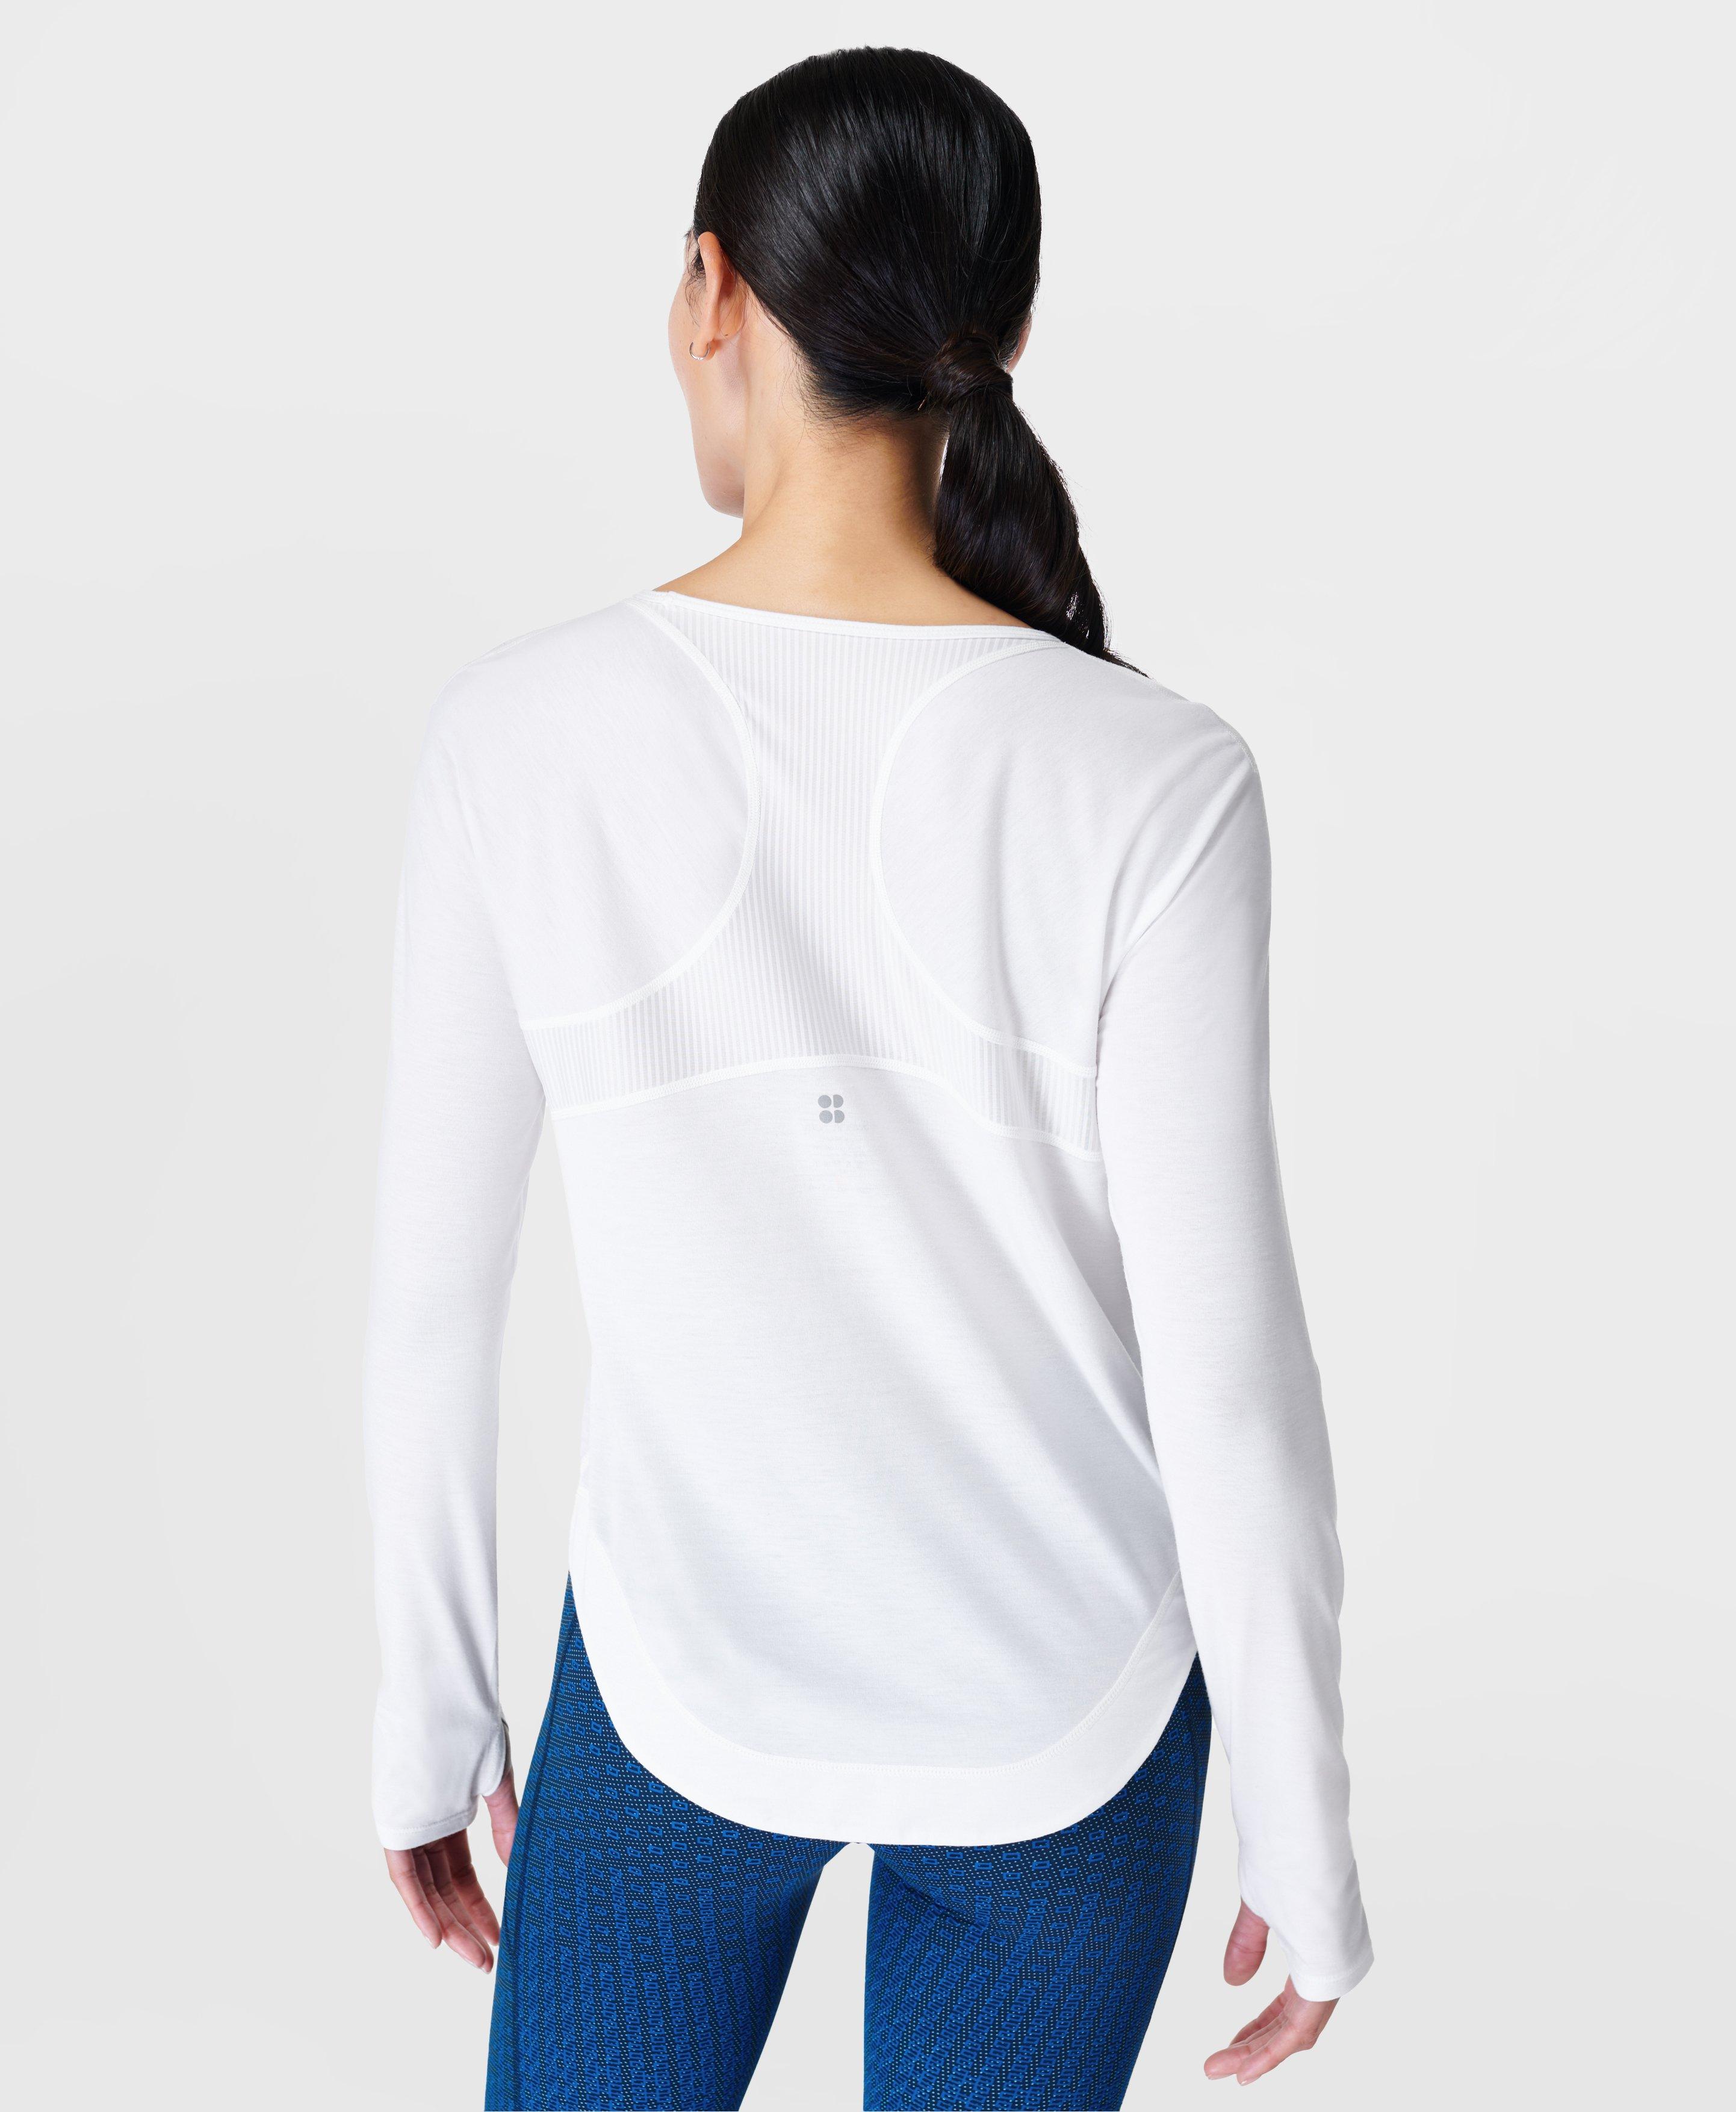 adviicd Long Sleeve Workout Tops For Women Women's Puff Sleeve Square Neck  Short Sleeve Elegant Tee Top White L 